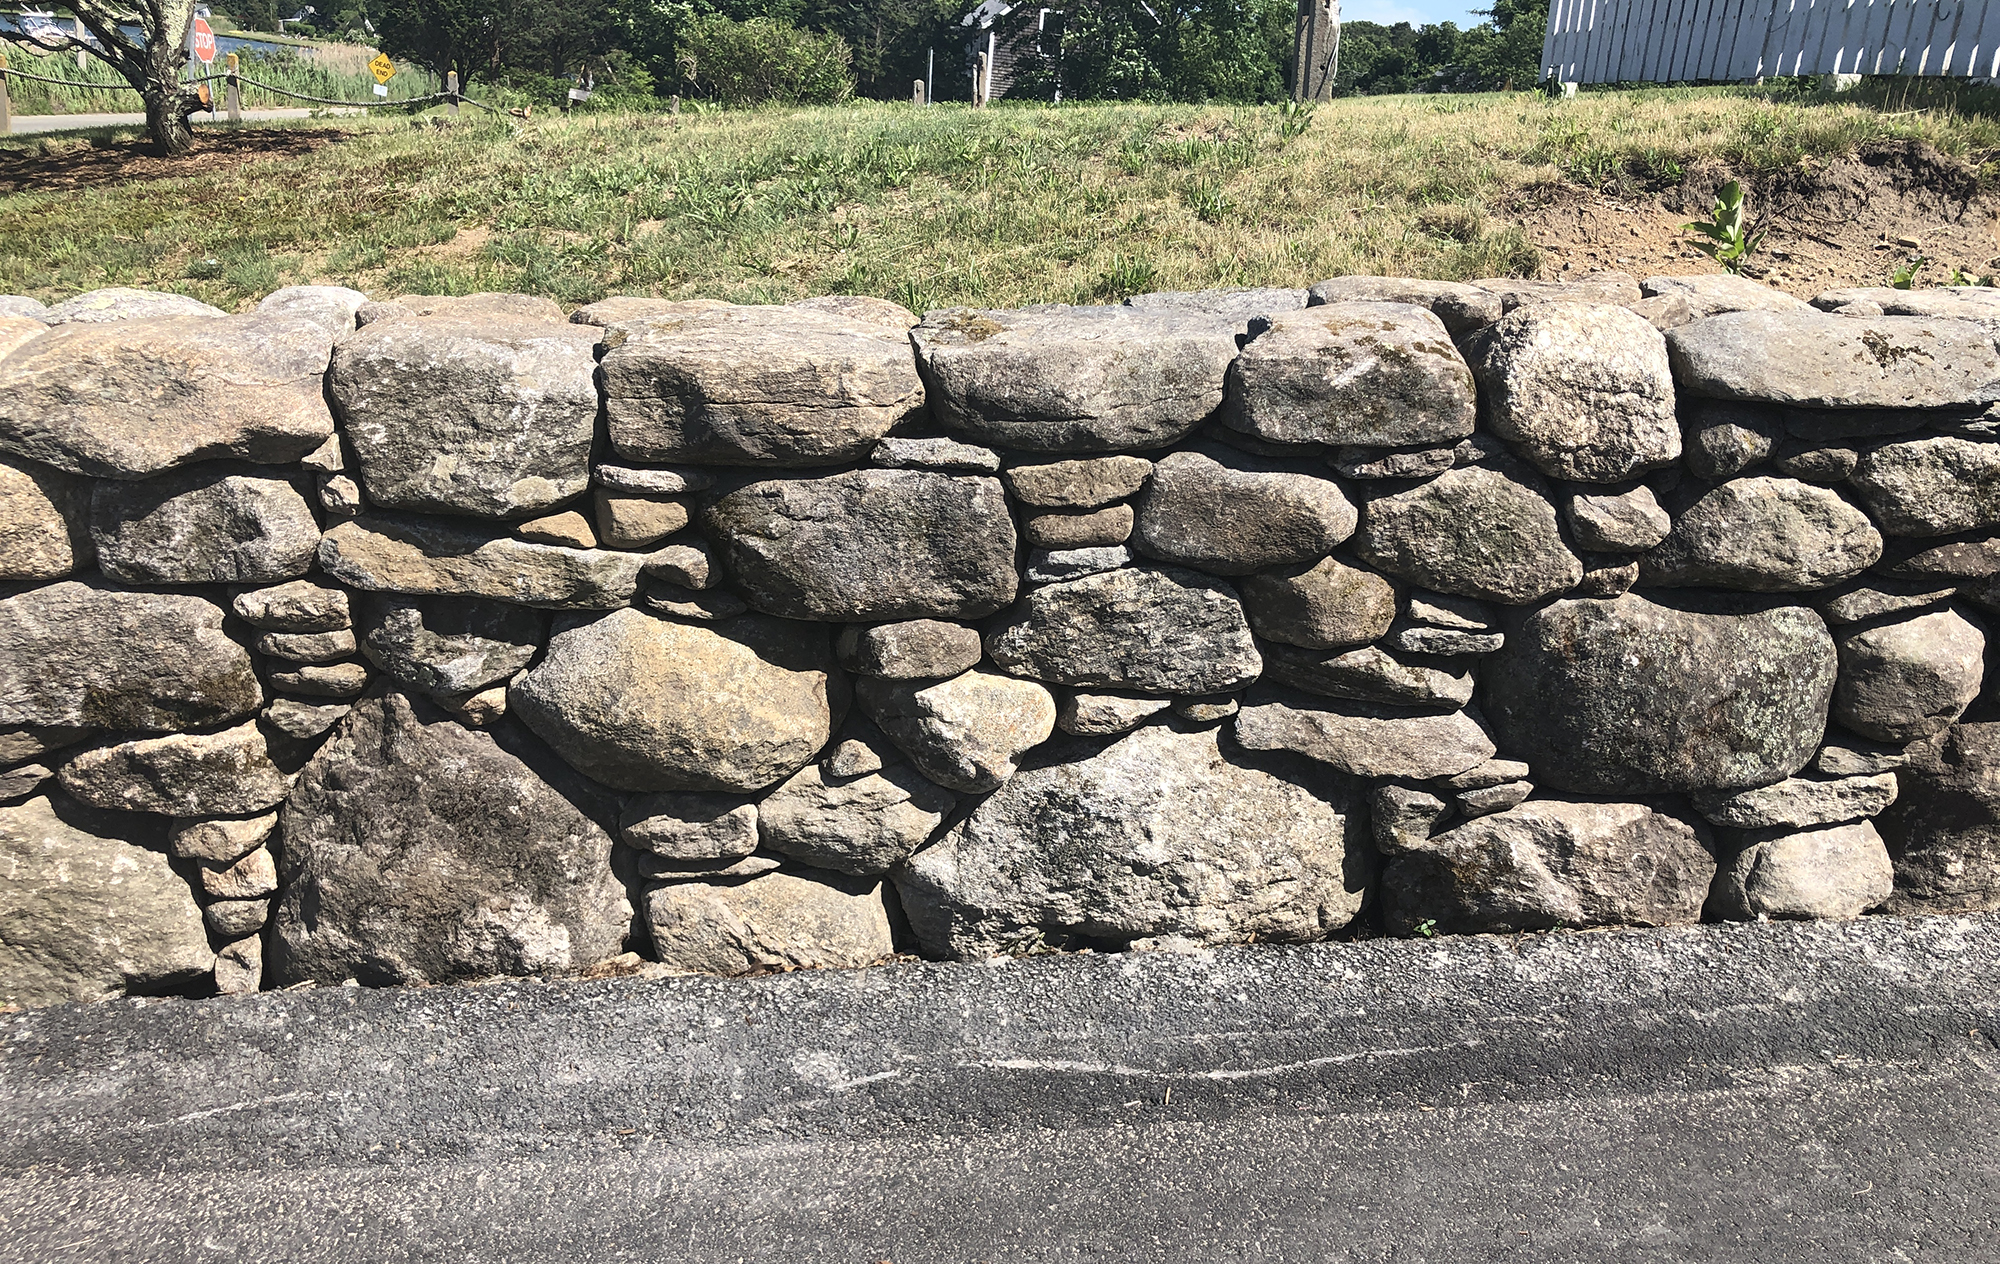 Thrifty Choice Chilling Stones, New England fieldstone, drink